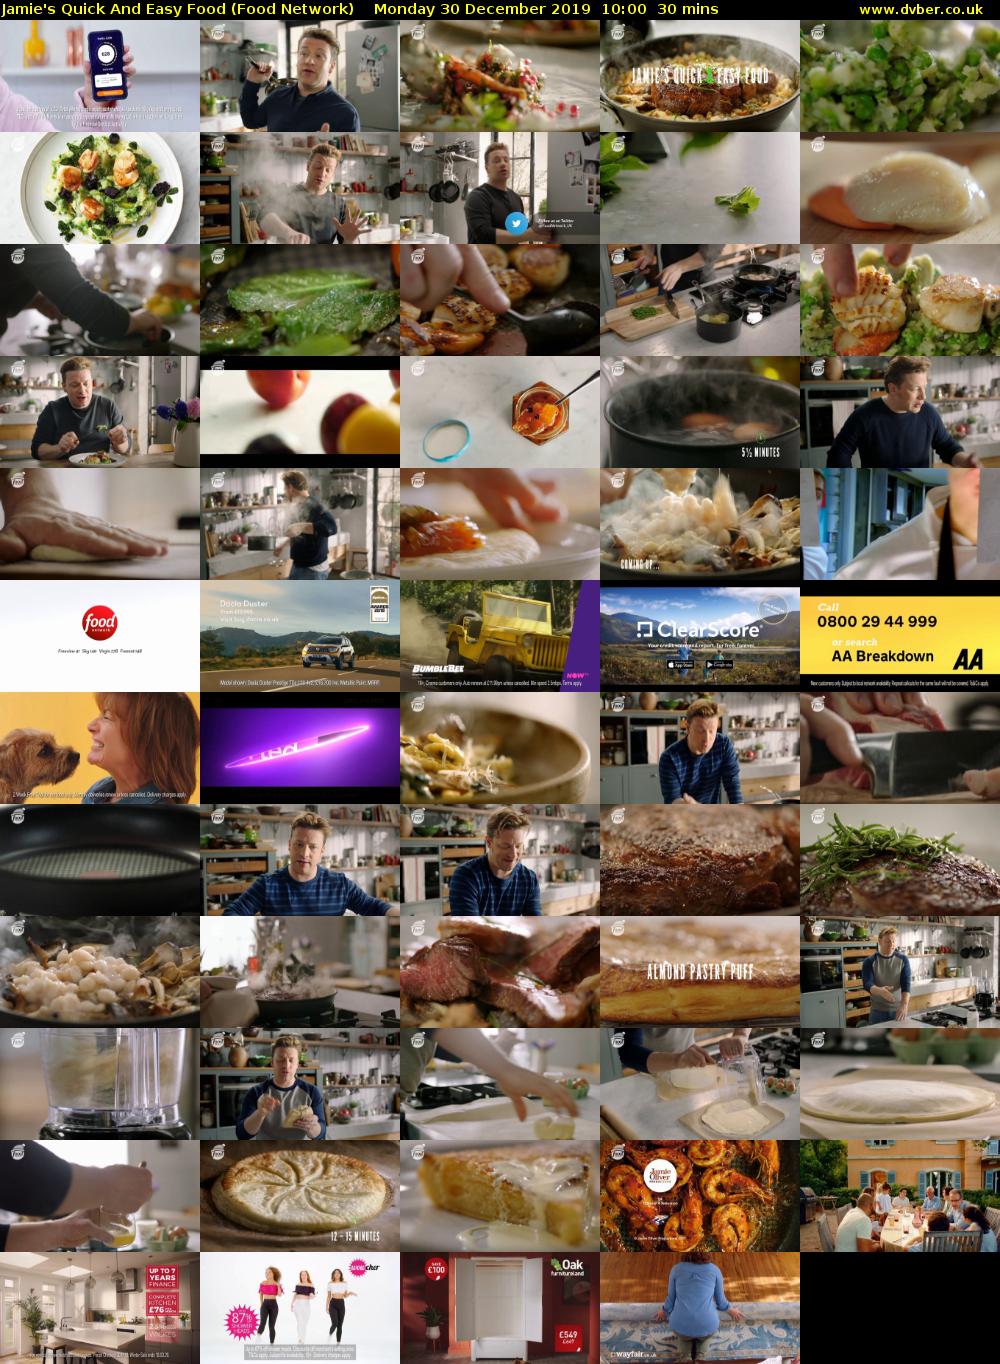 Jamie's Quick And Easy Food (Food Network) Monday 30 December 2019 10:00 - 10:30